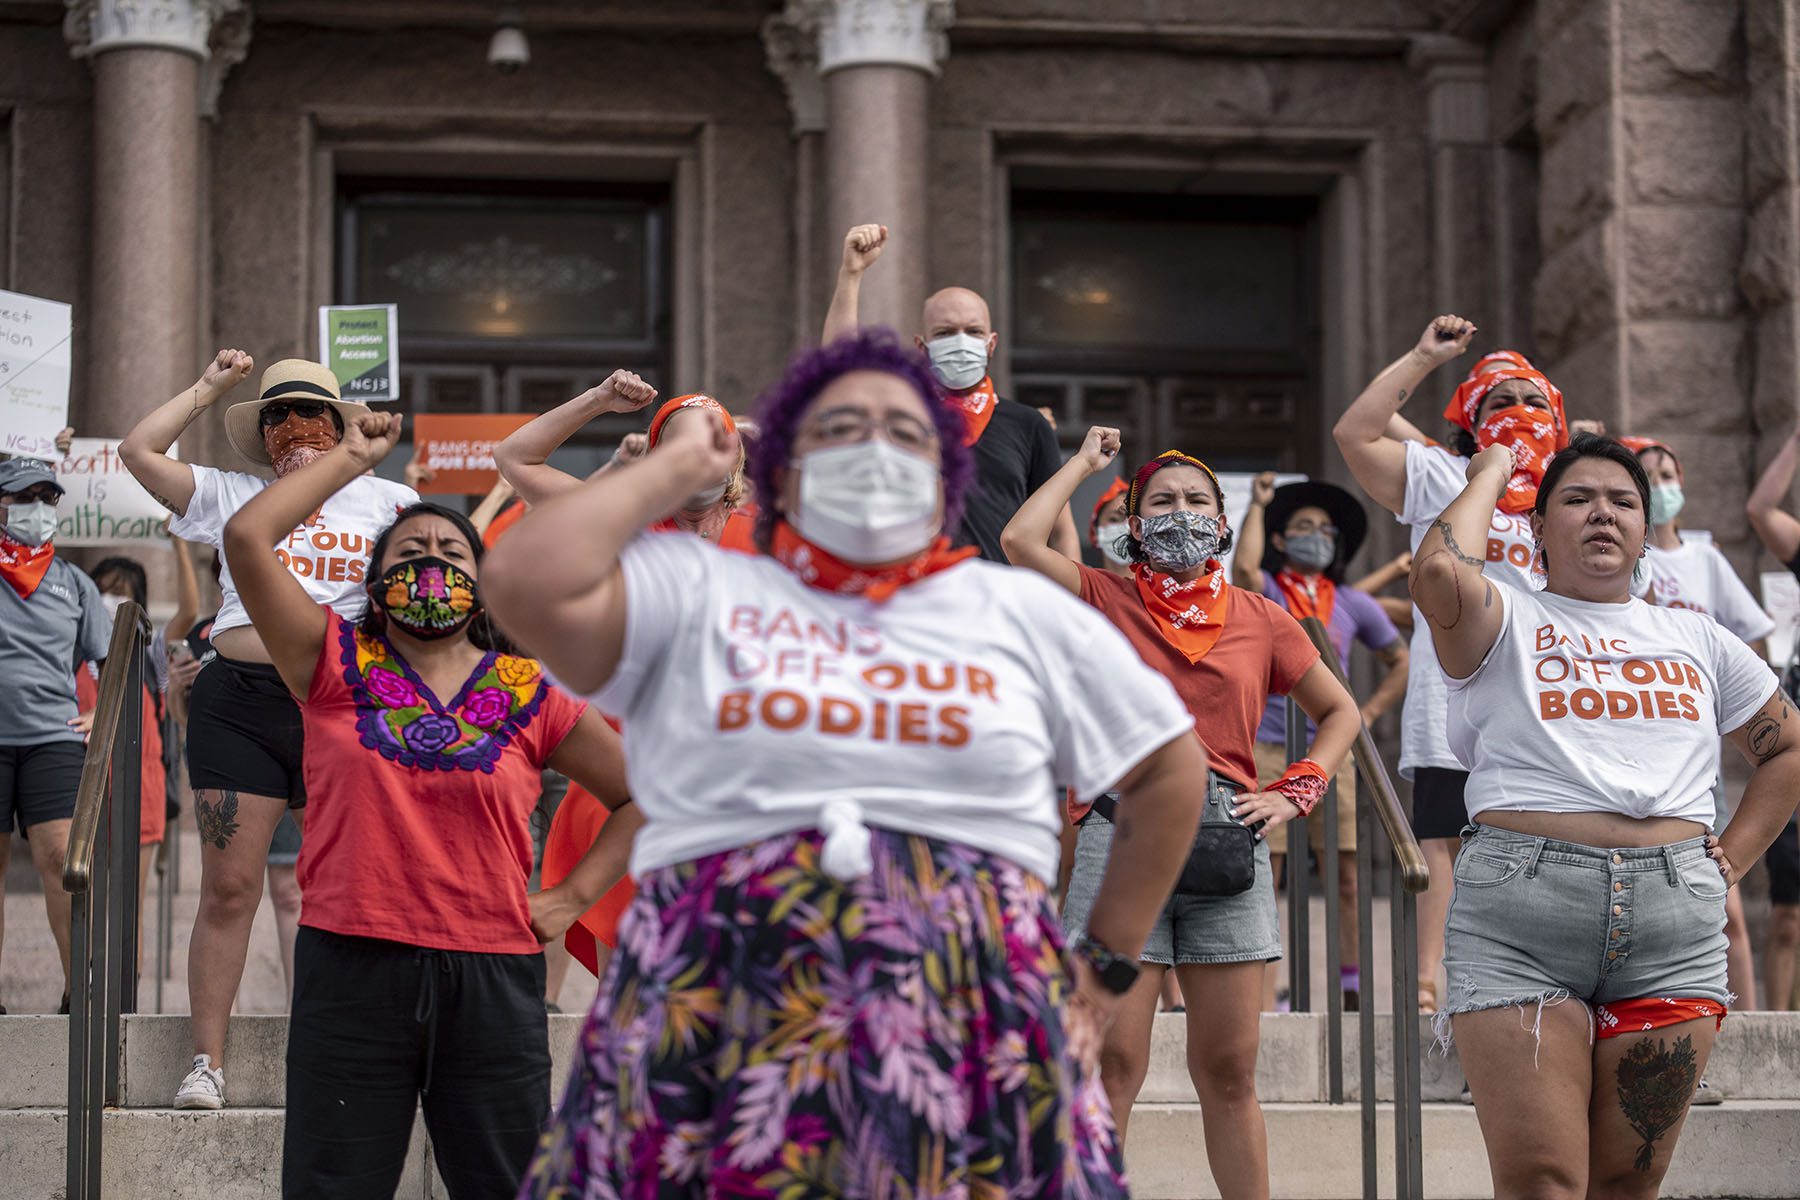 People wearing matching shirts that read "bans off our bodies" raise their fist in protest in front of the Texas State Capitol.